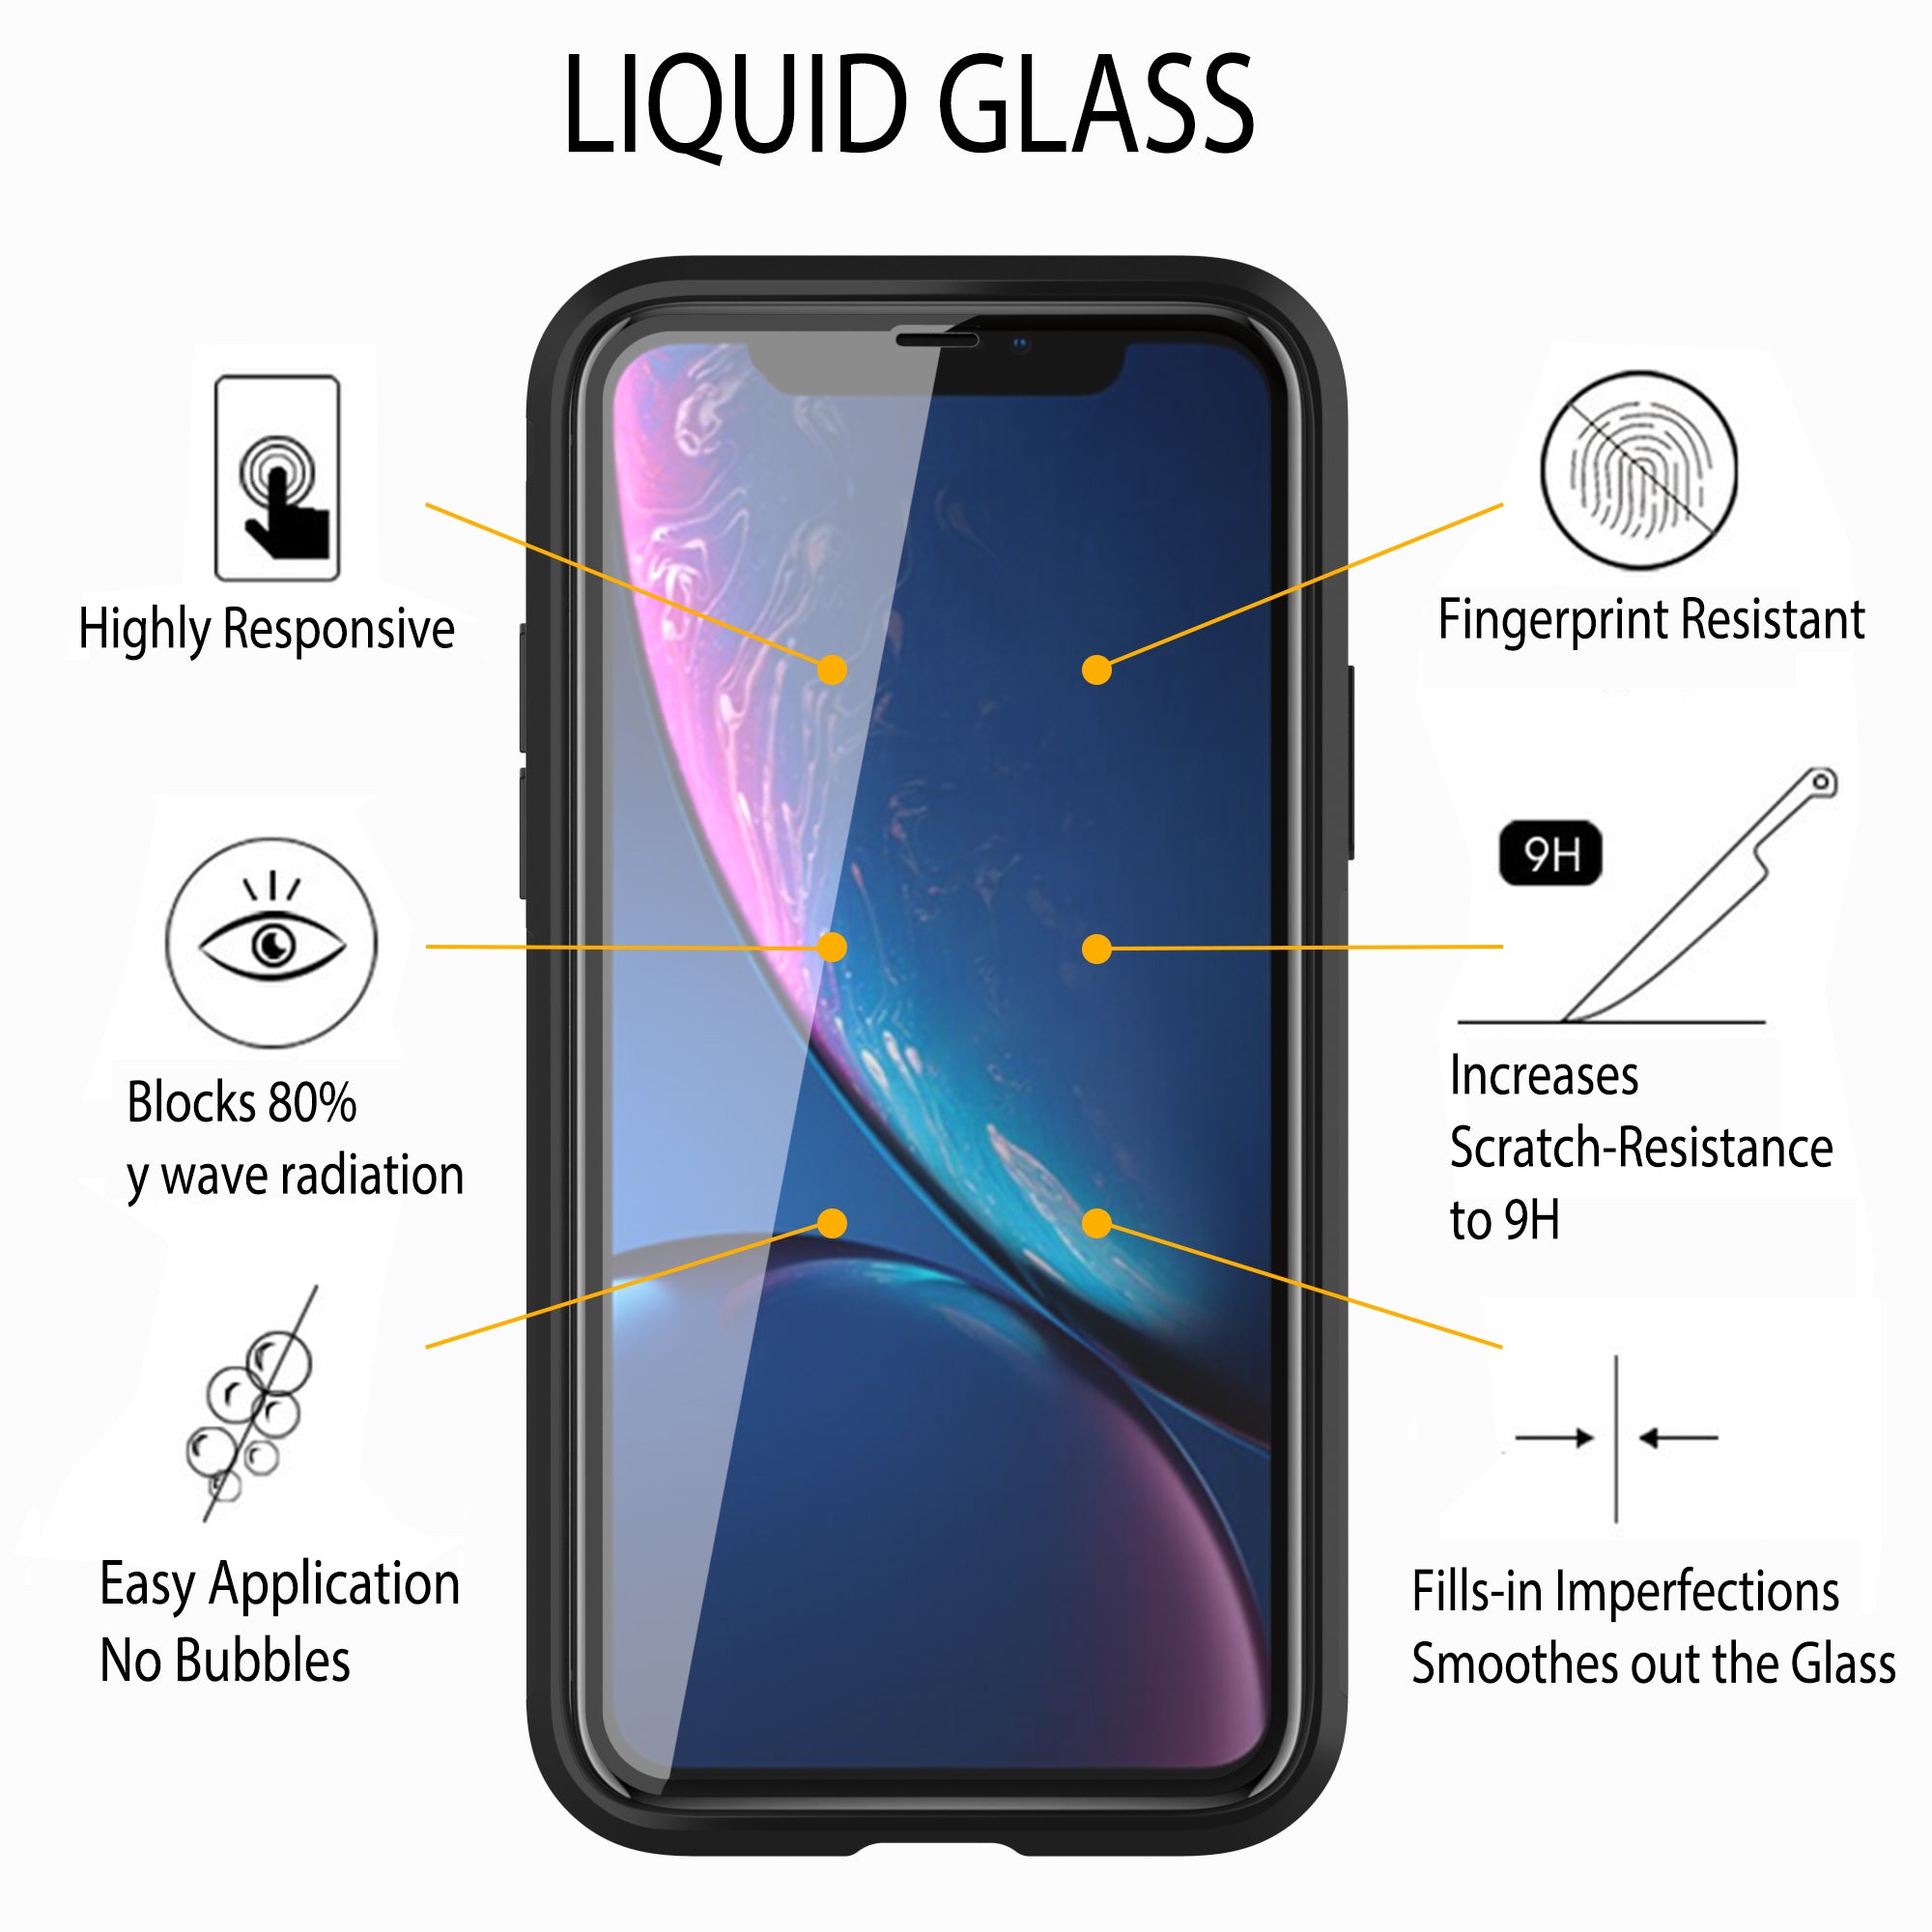 Luvvitt Liquid Glass Screen Protector Invisible Nano Protection for Phone and Tablet Glass Screens